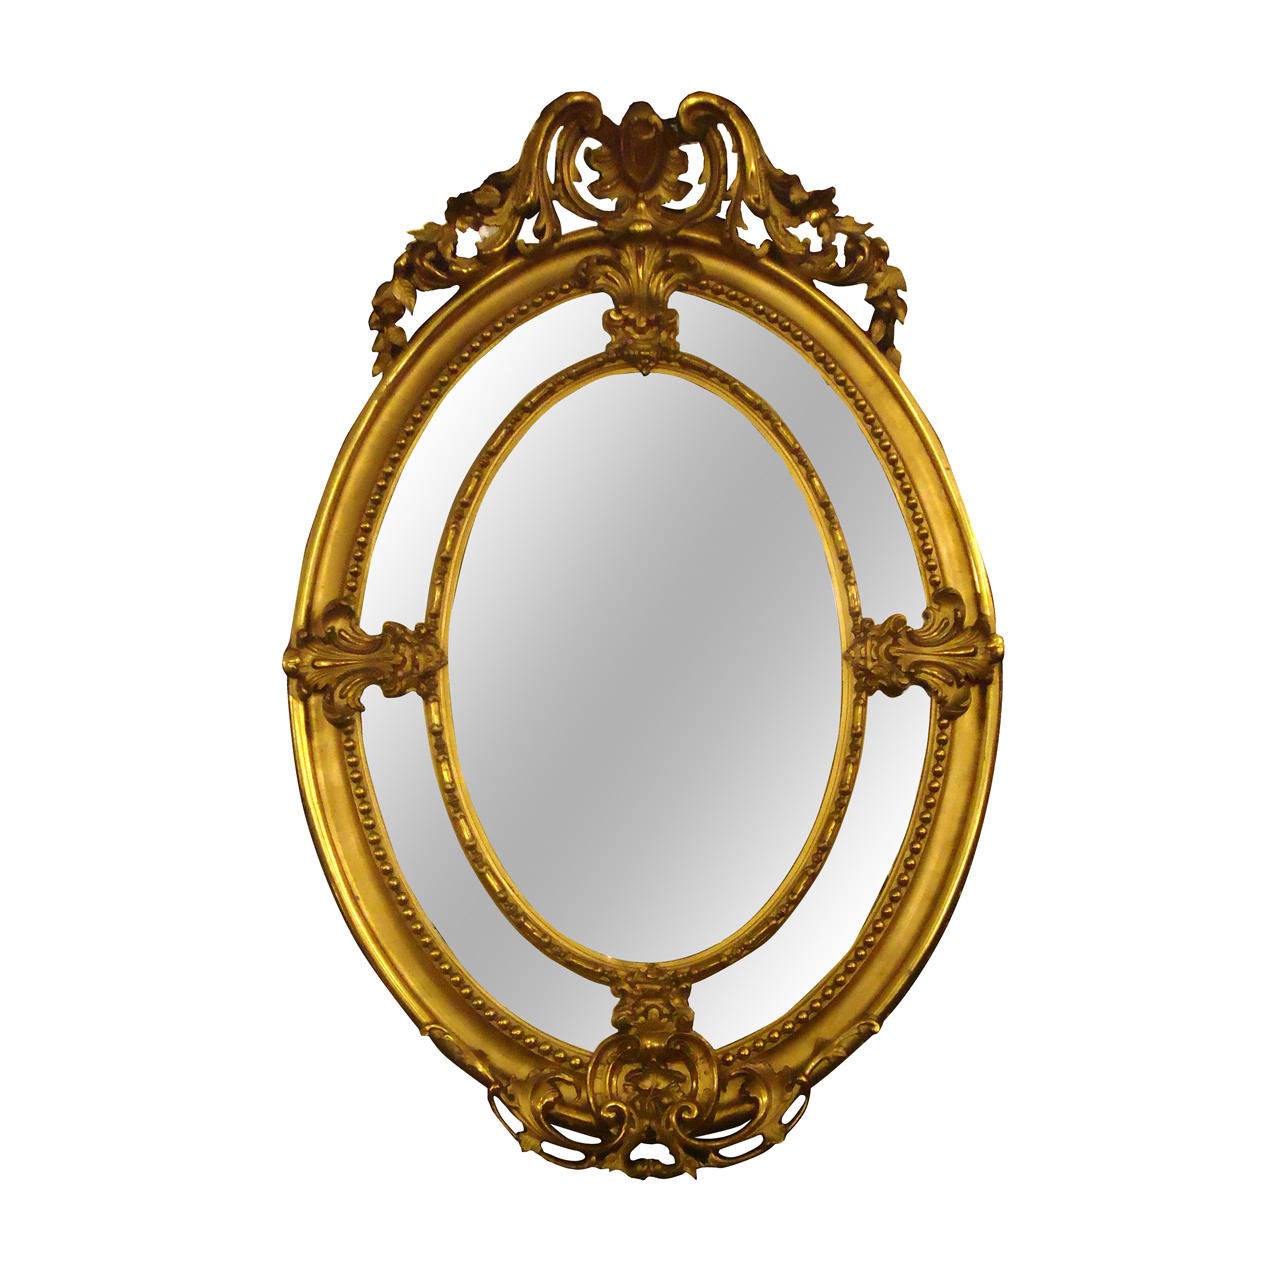 Magnificent French Rococo Large Oval Mirror at 1stdibs